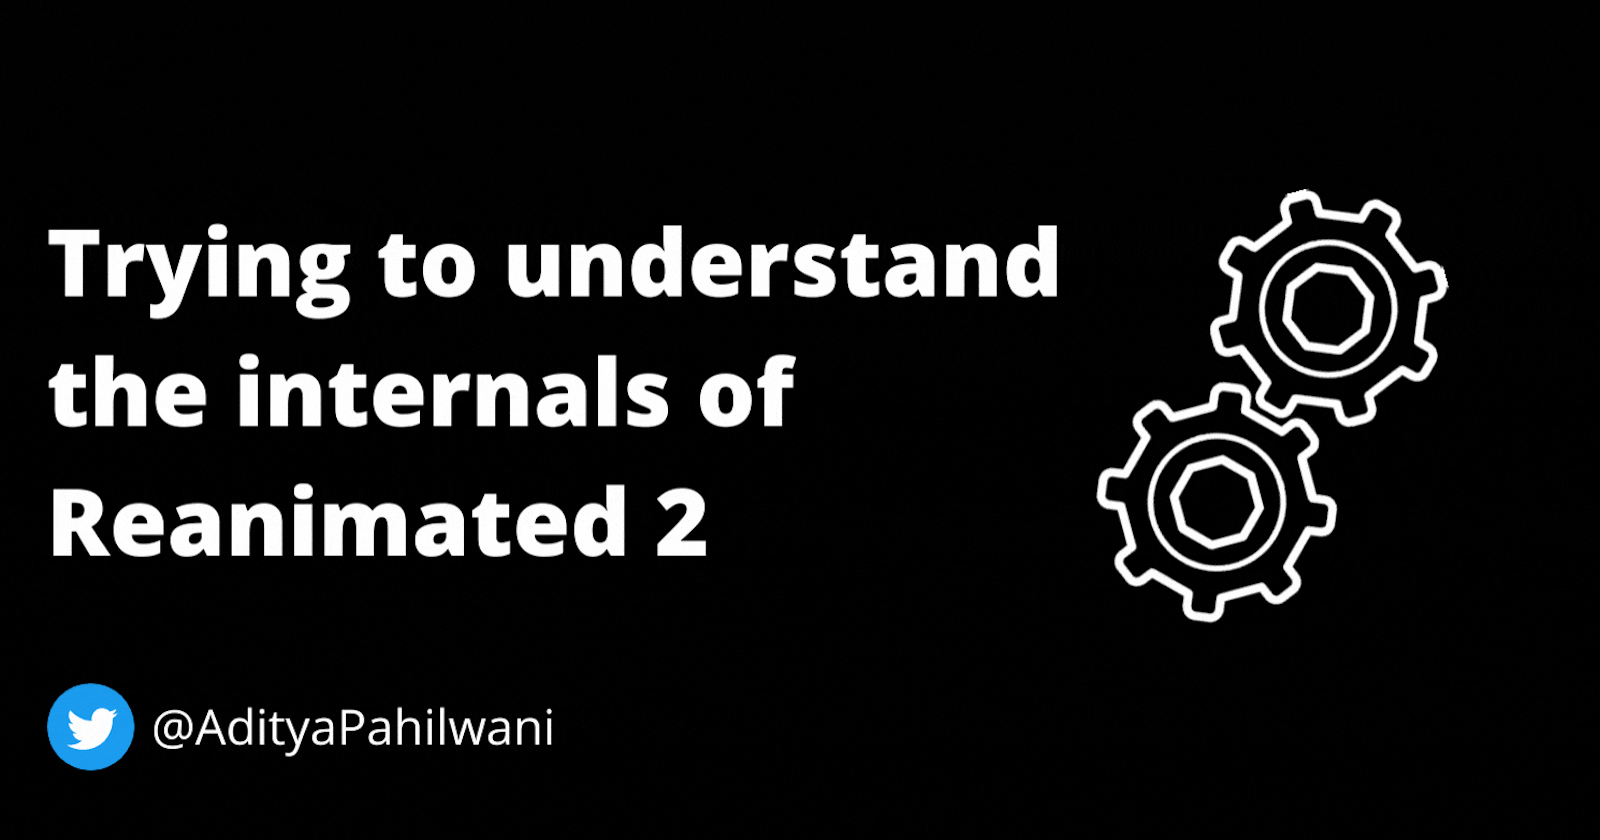 Trying to understand the internals of Reanimated 2